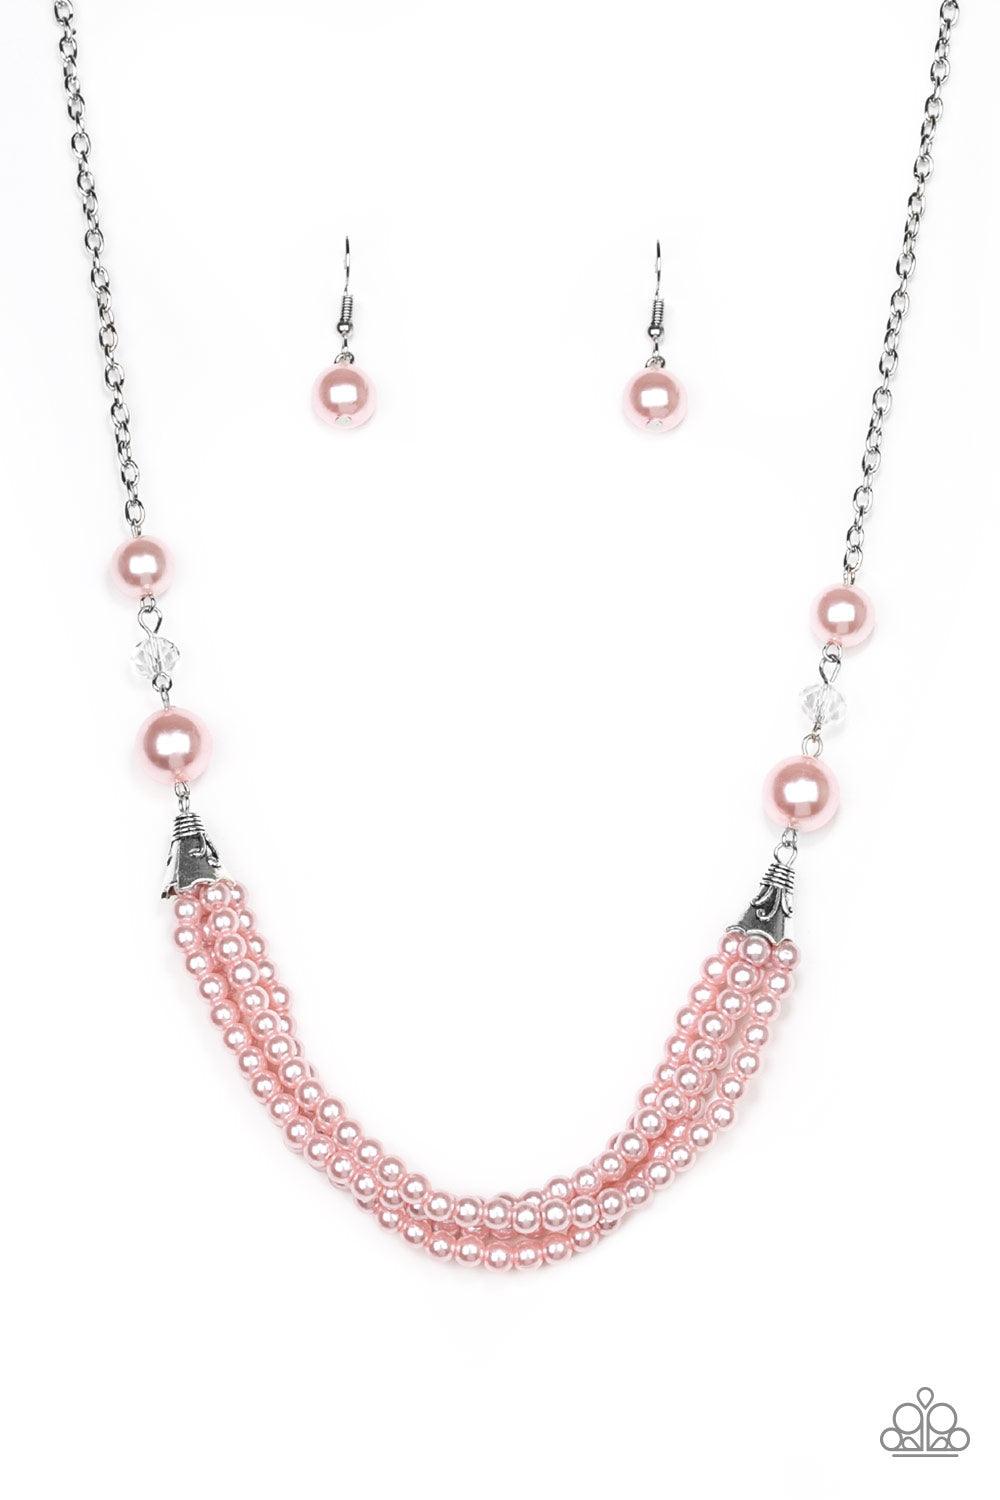 Paparazzi Accessories One-WOMAN Show - Pink Oversized pink pearls and crystal-like beads give way to layers of beaded pearl strands below the collar for a timeless look. Features an adjustable clasp closure. Sold as one individual necklace. Includes one p